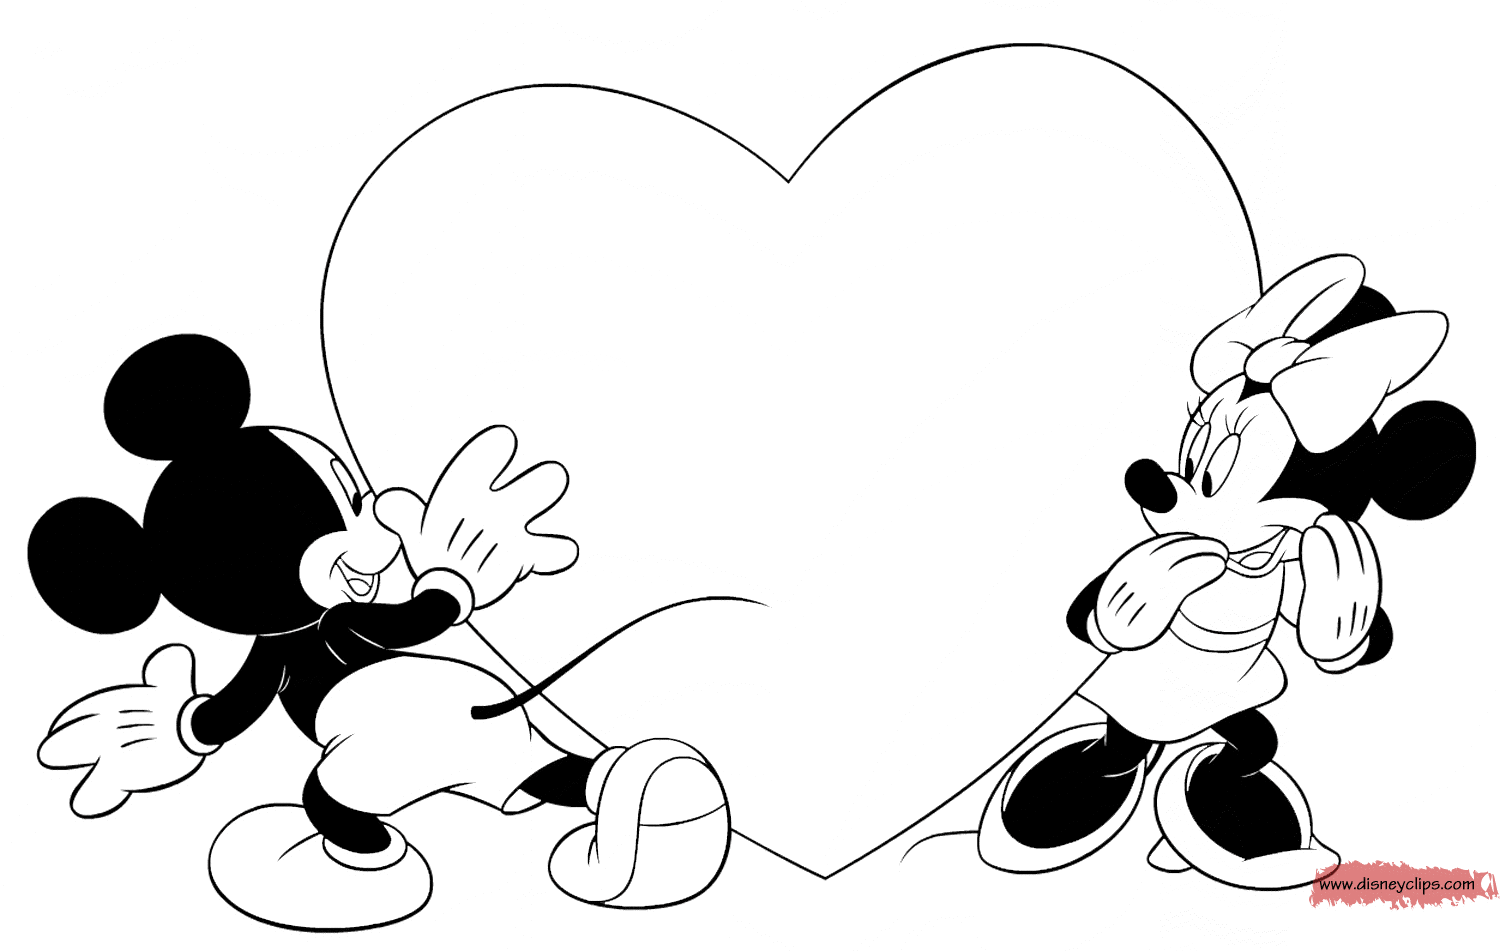 Valentine's Day Coloring Pages | Disney's World of Wonders